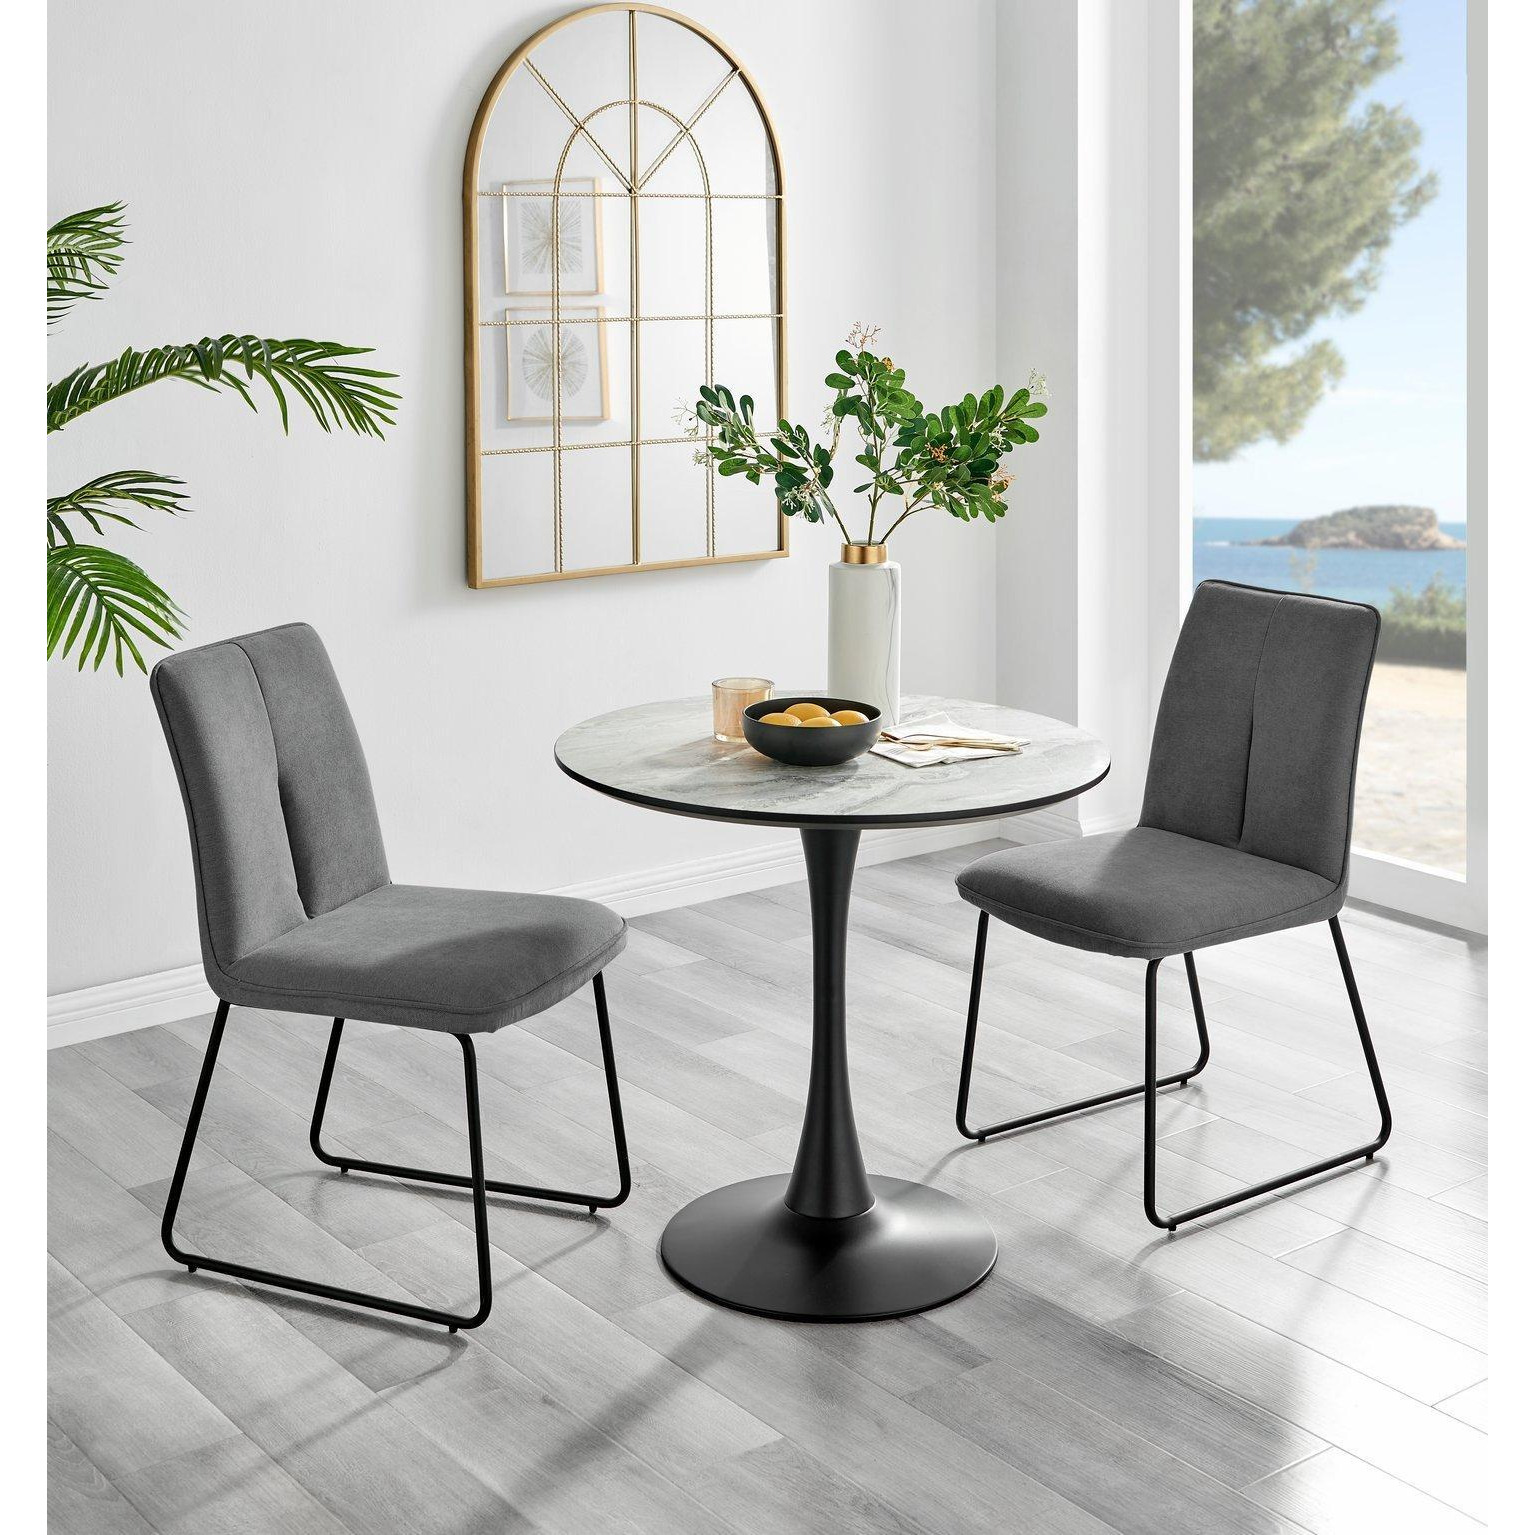 Elina White Marble Effect Scratch Resistant Dining Table & 2 Halley Fabric Chairs - image 1